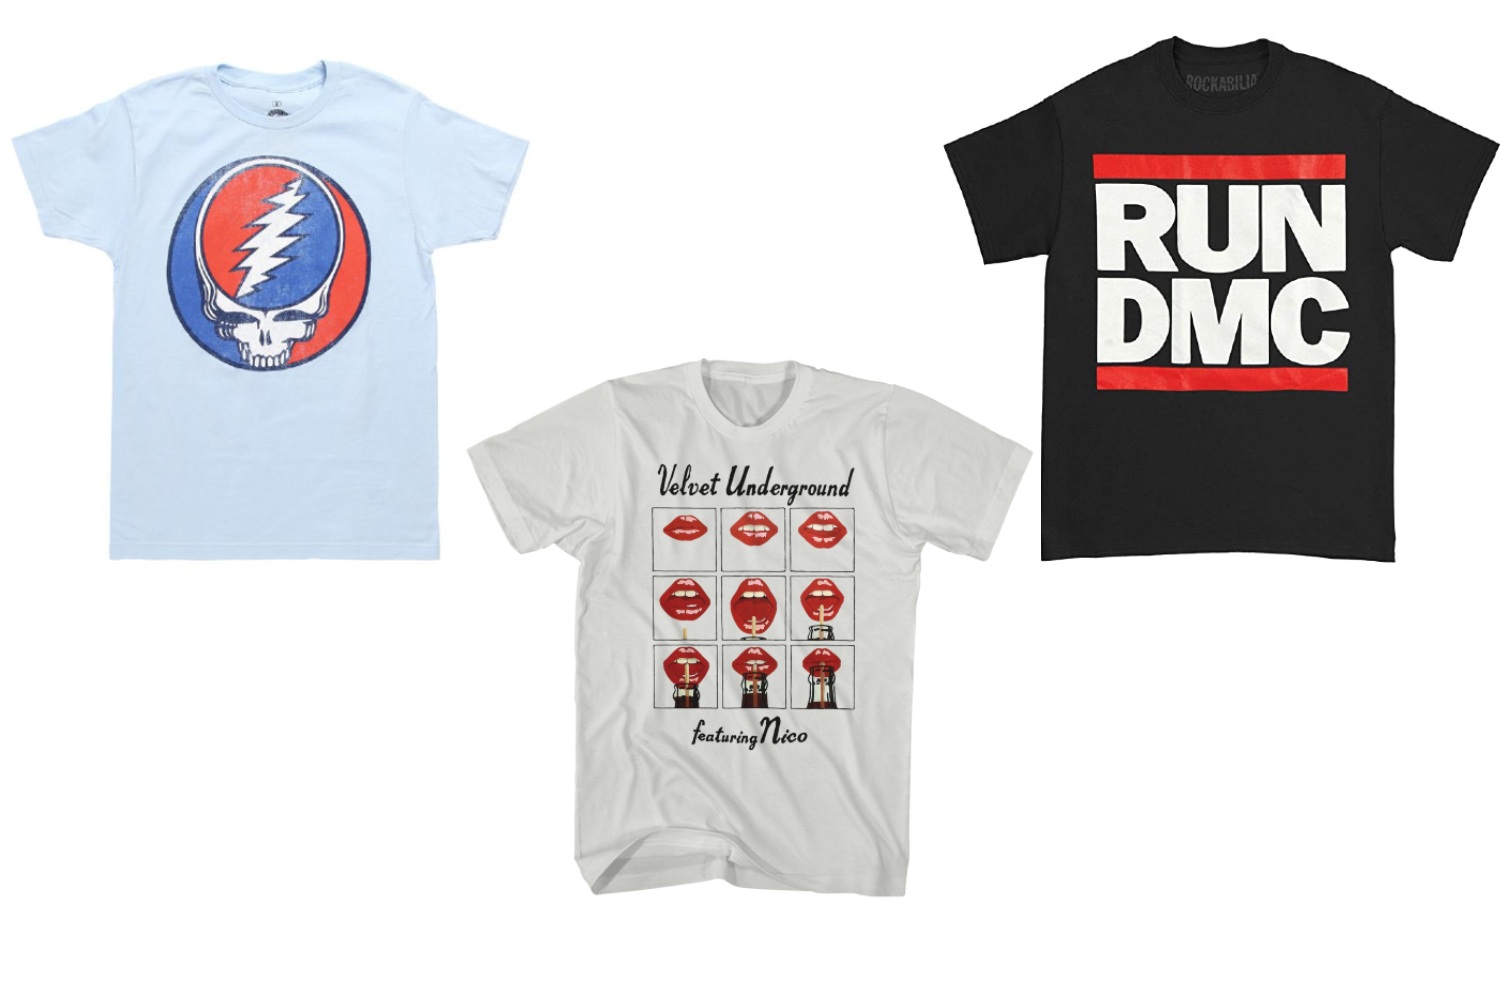 13 of the most iconic and best band t-shirts of all time